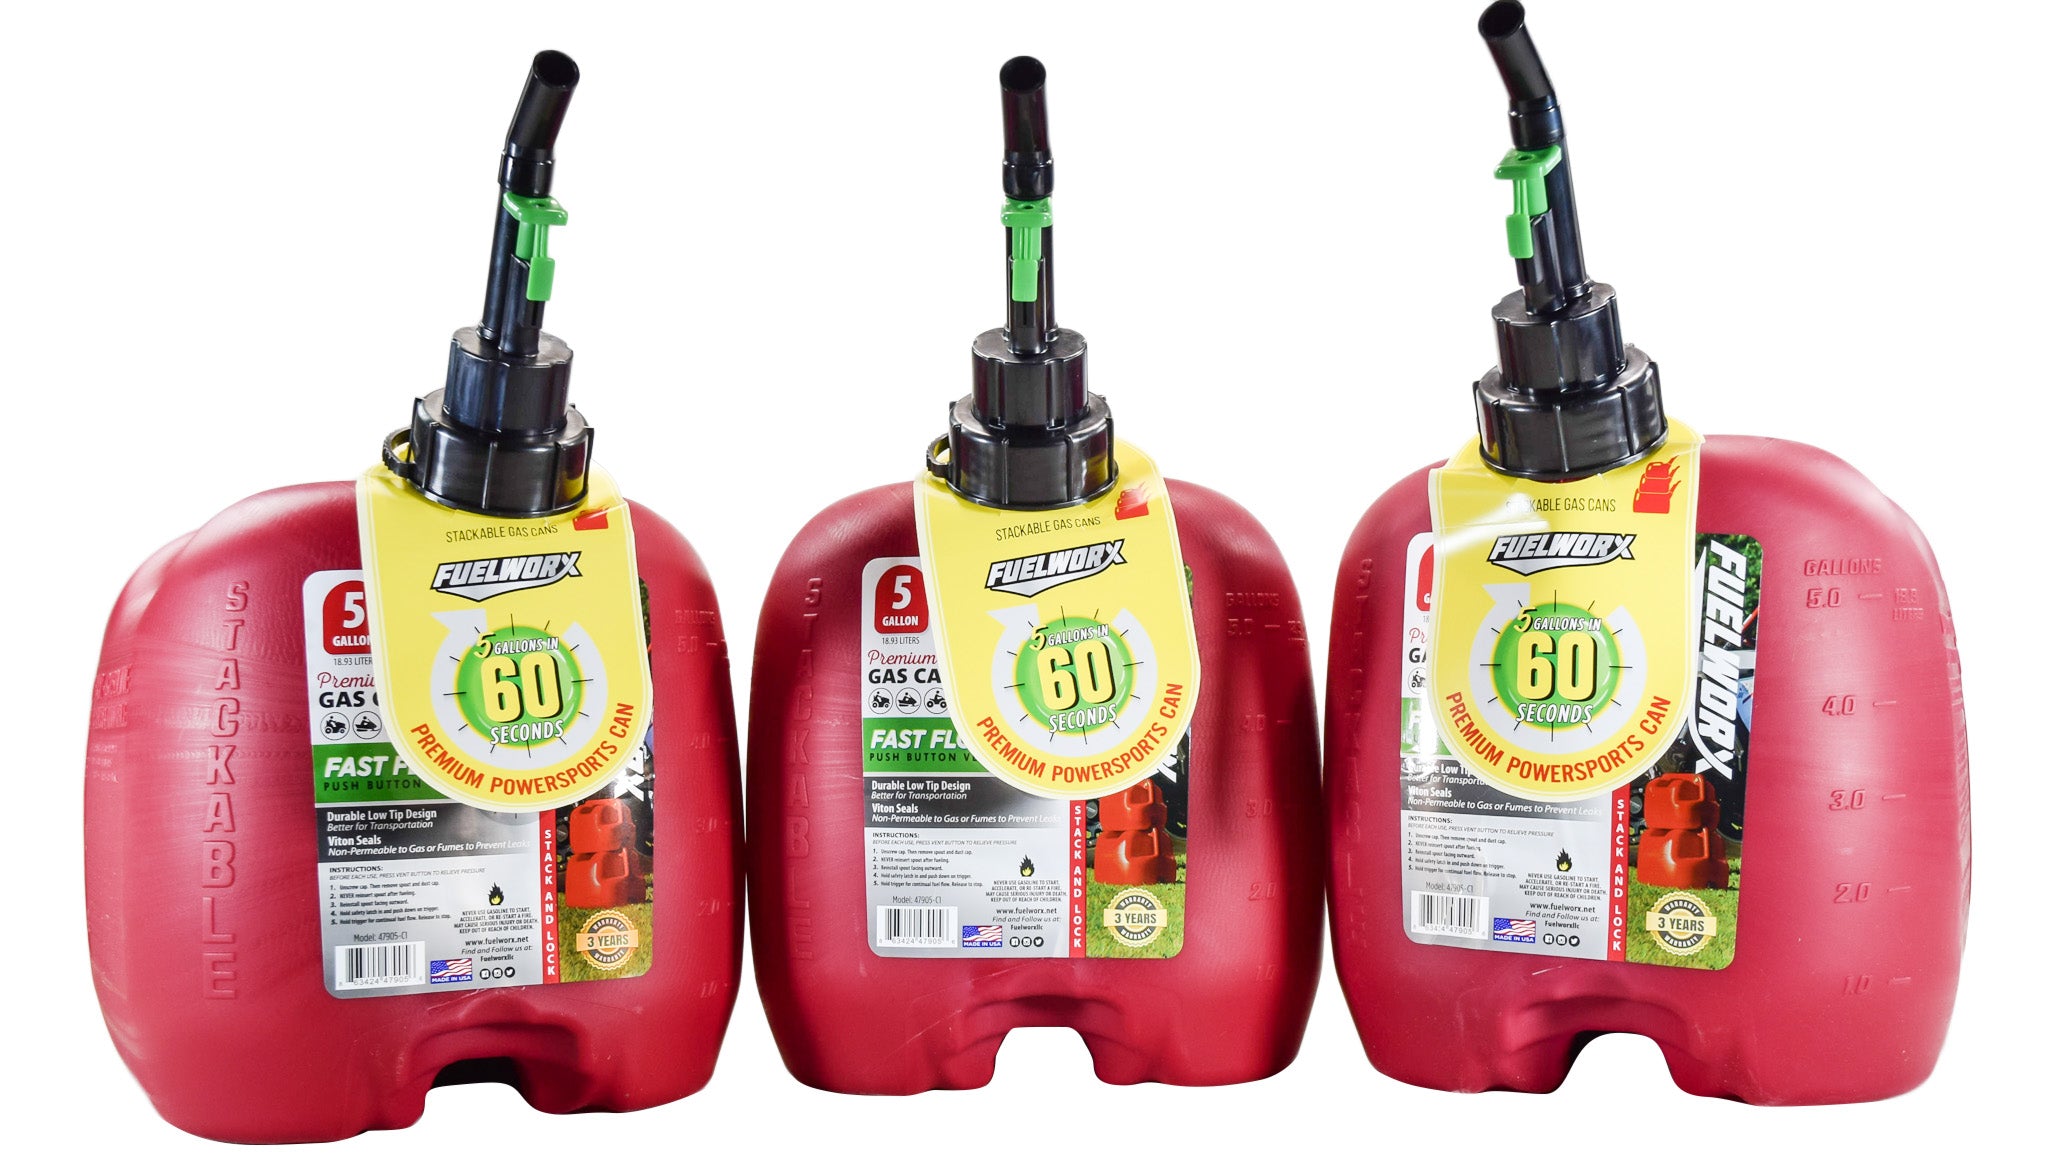 Fuelworx-Red-5-Gallon-Stackable-Fast-Pour-Gas-Fuel-Can-CARB-Compliant-Made-in-The-USA-5-Gallon-Gas-Can-3-Pack-image-1